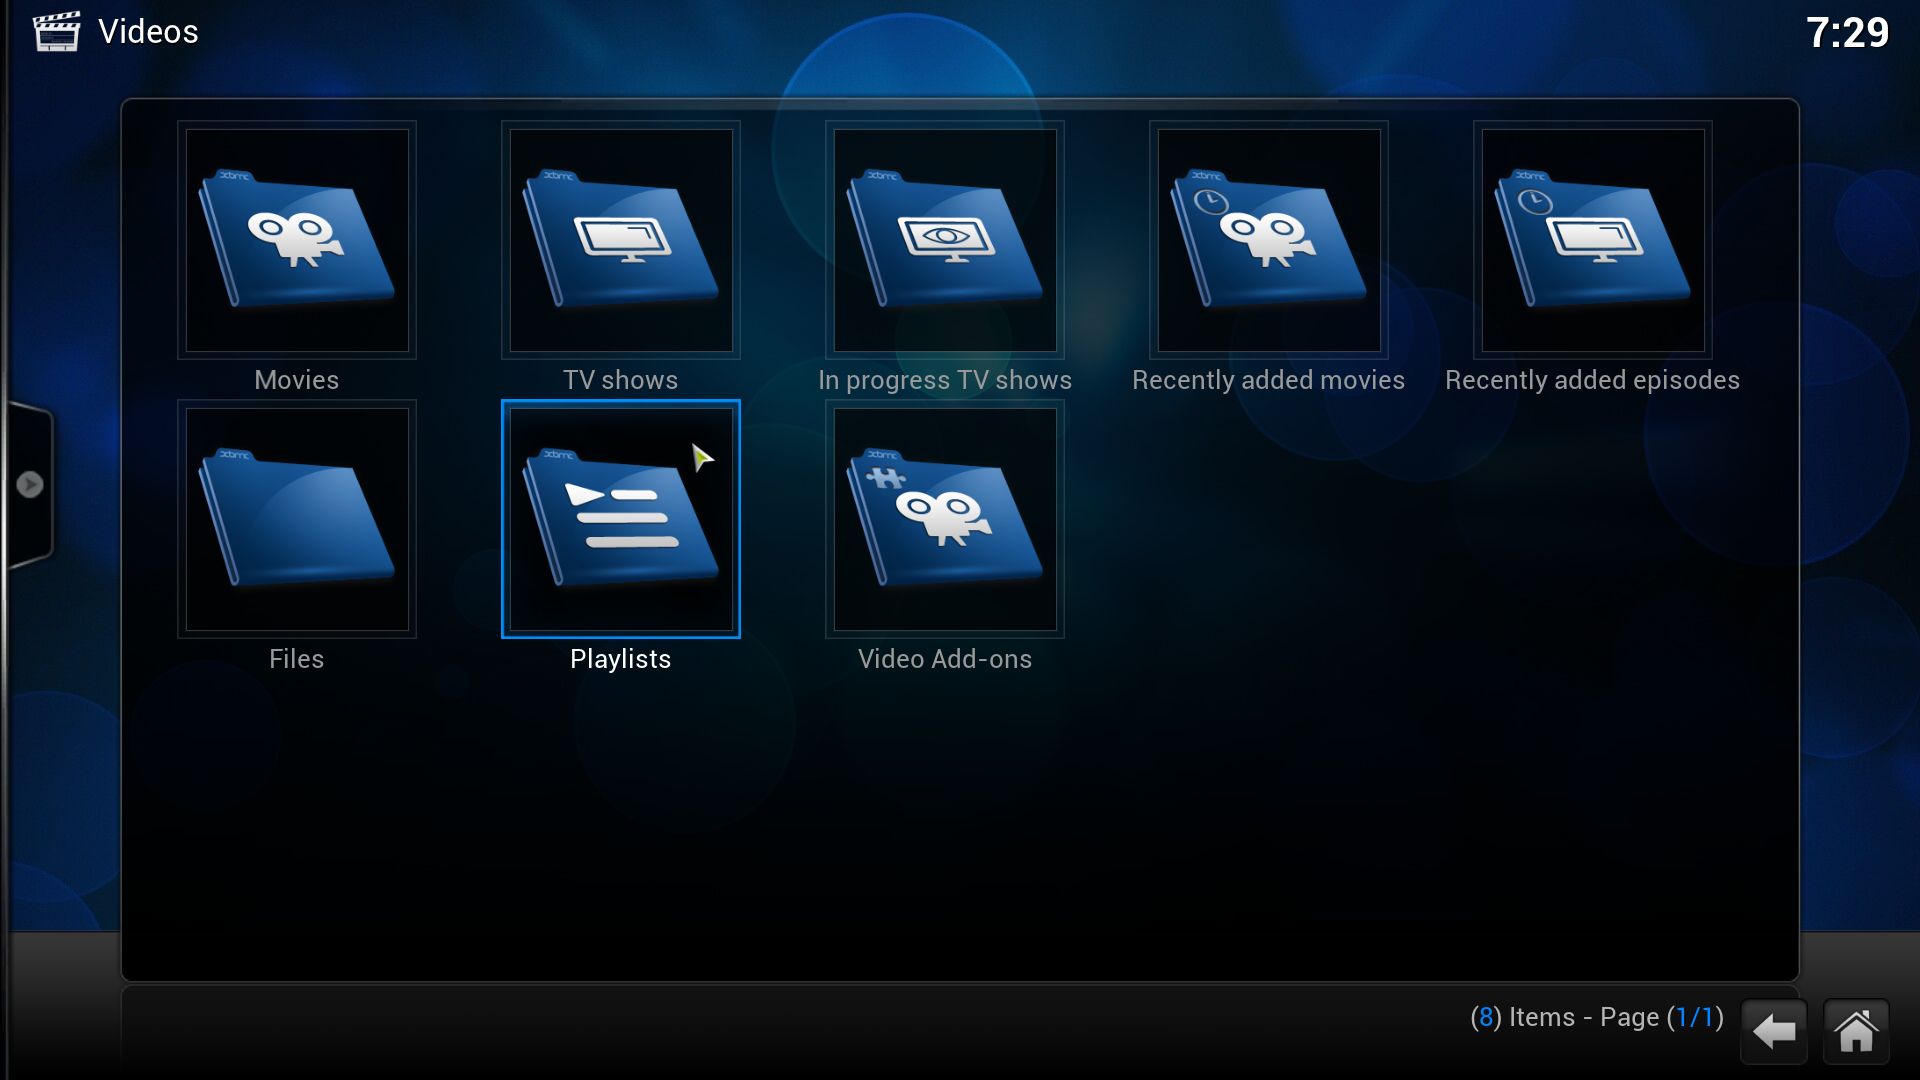 Step 2: Select "Playlists" from the options